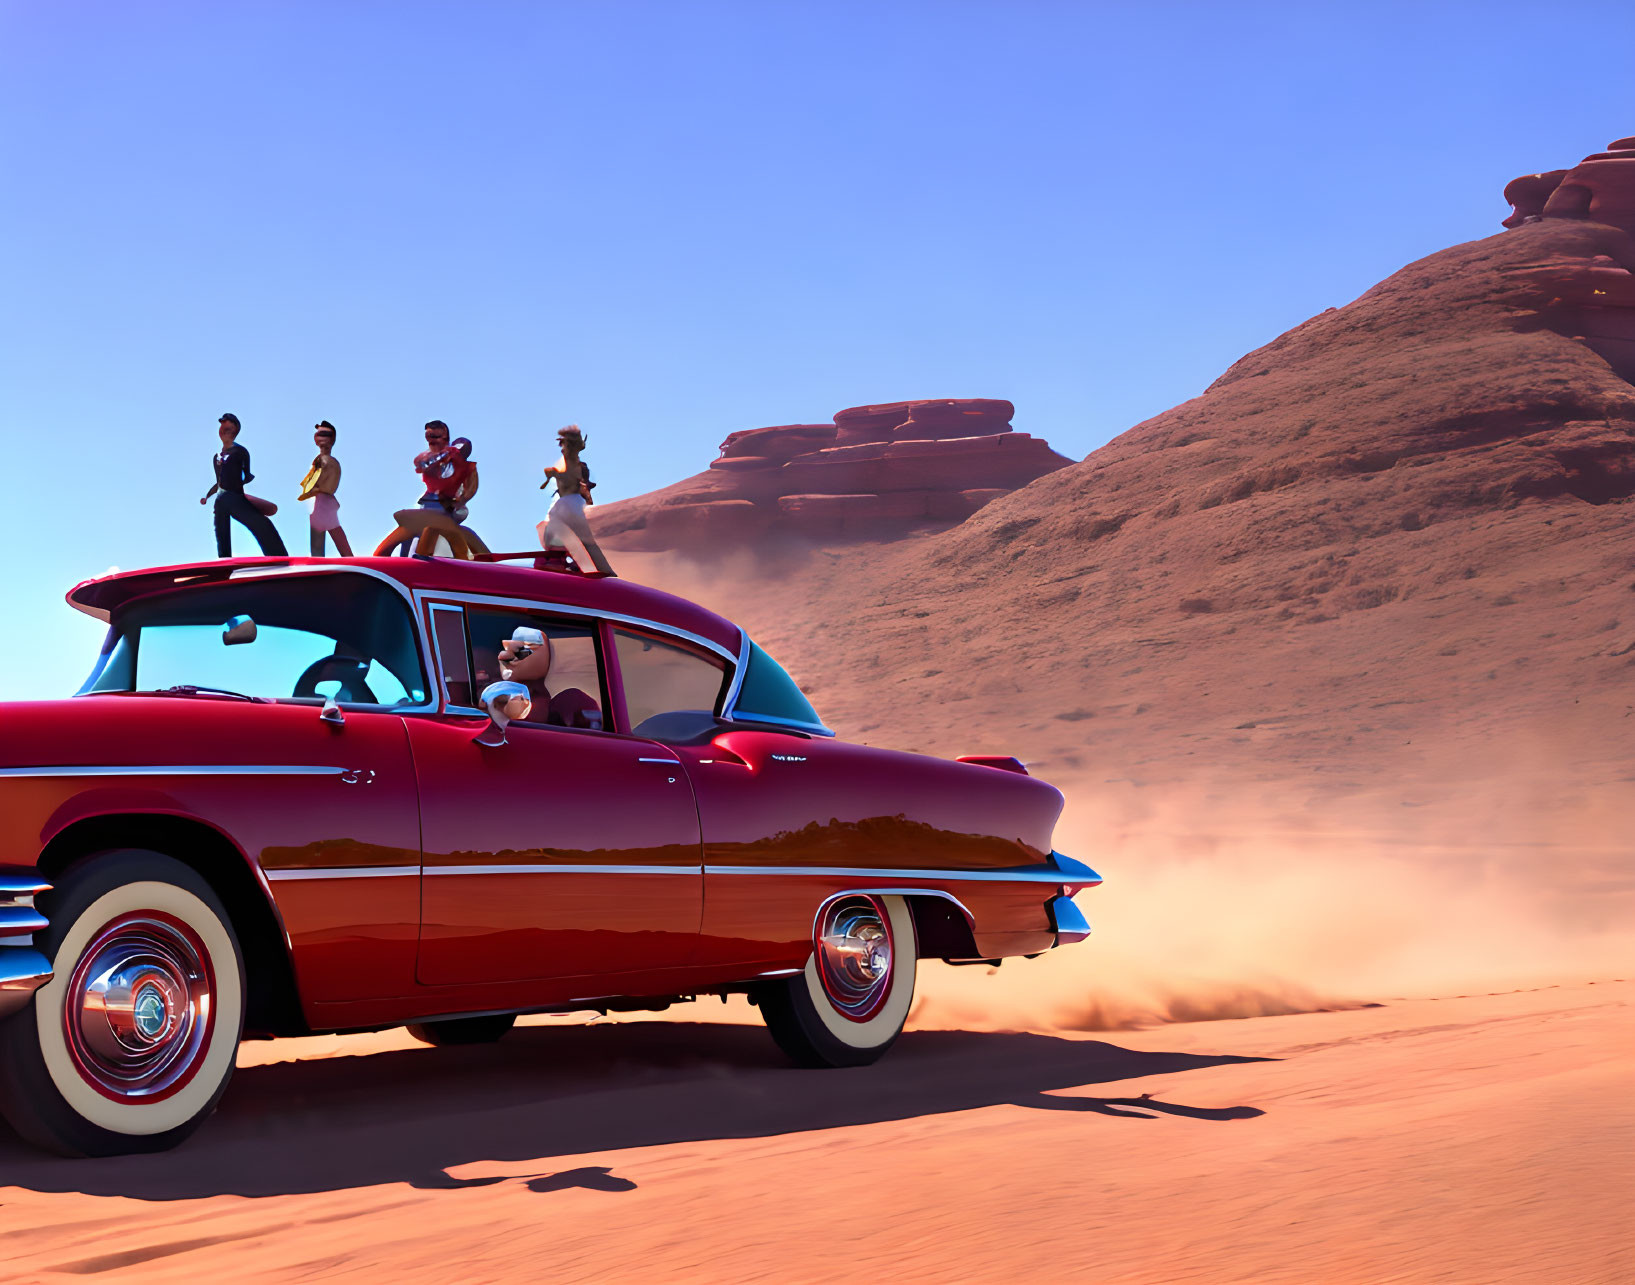 Vintage red car driving through desert with animated characters on top and inside